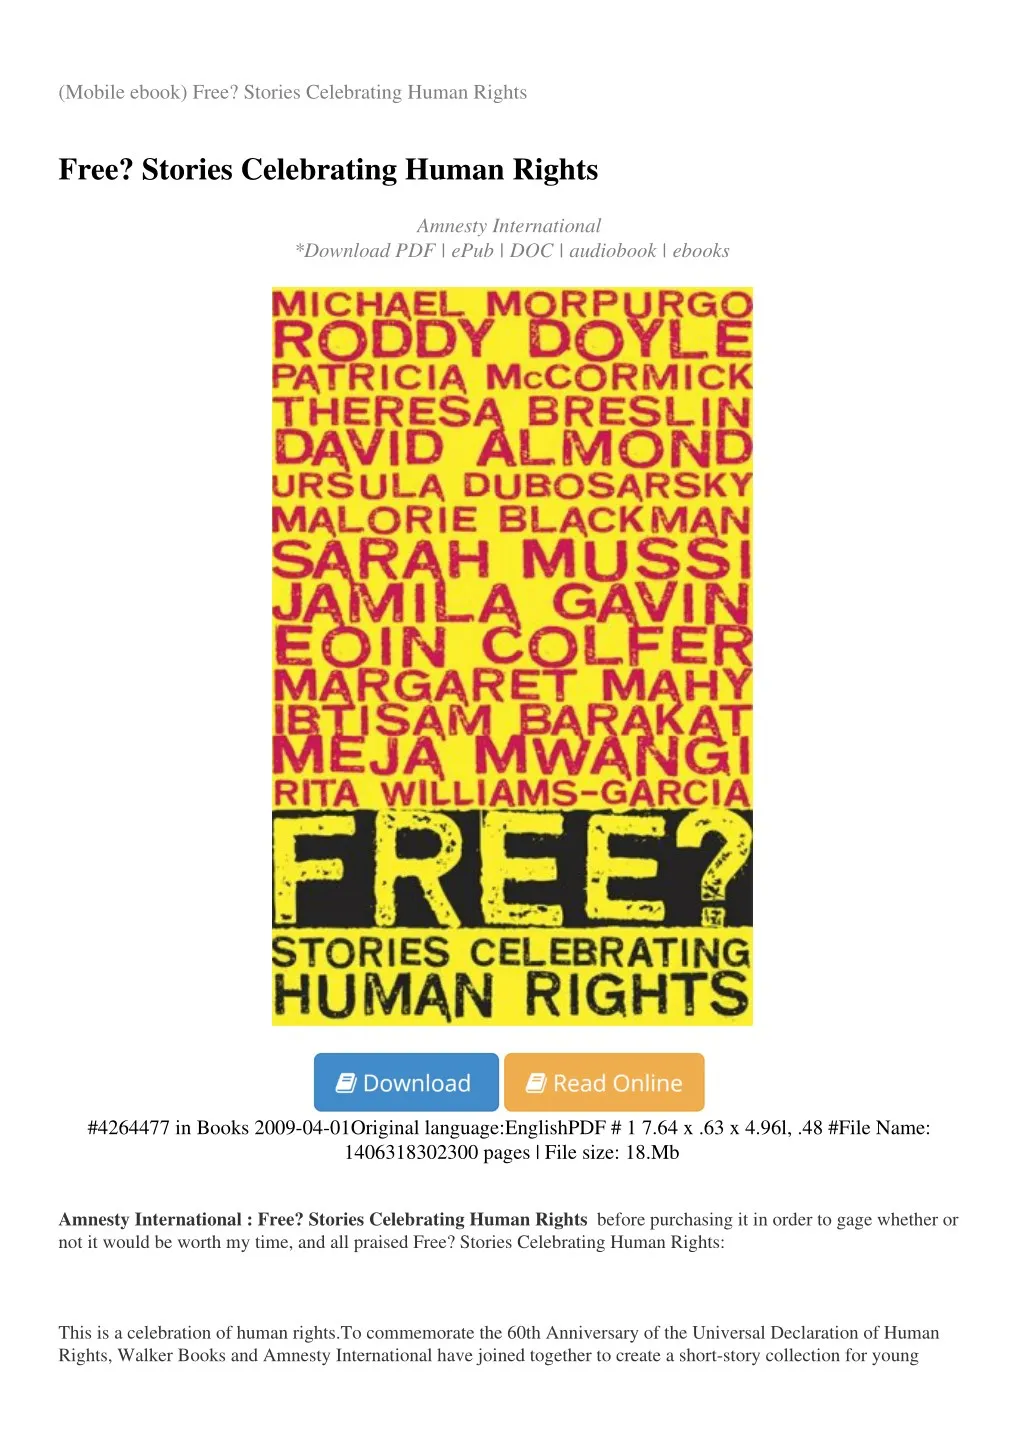 mobile ebook free stories celebrating human rights